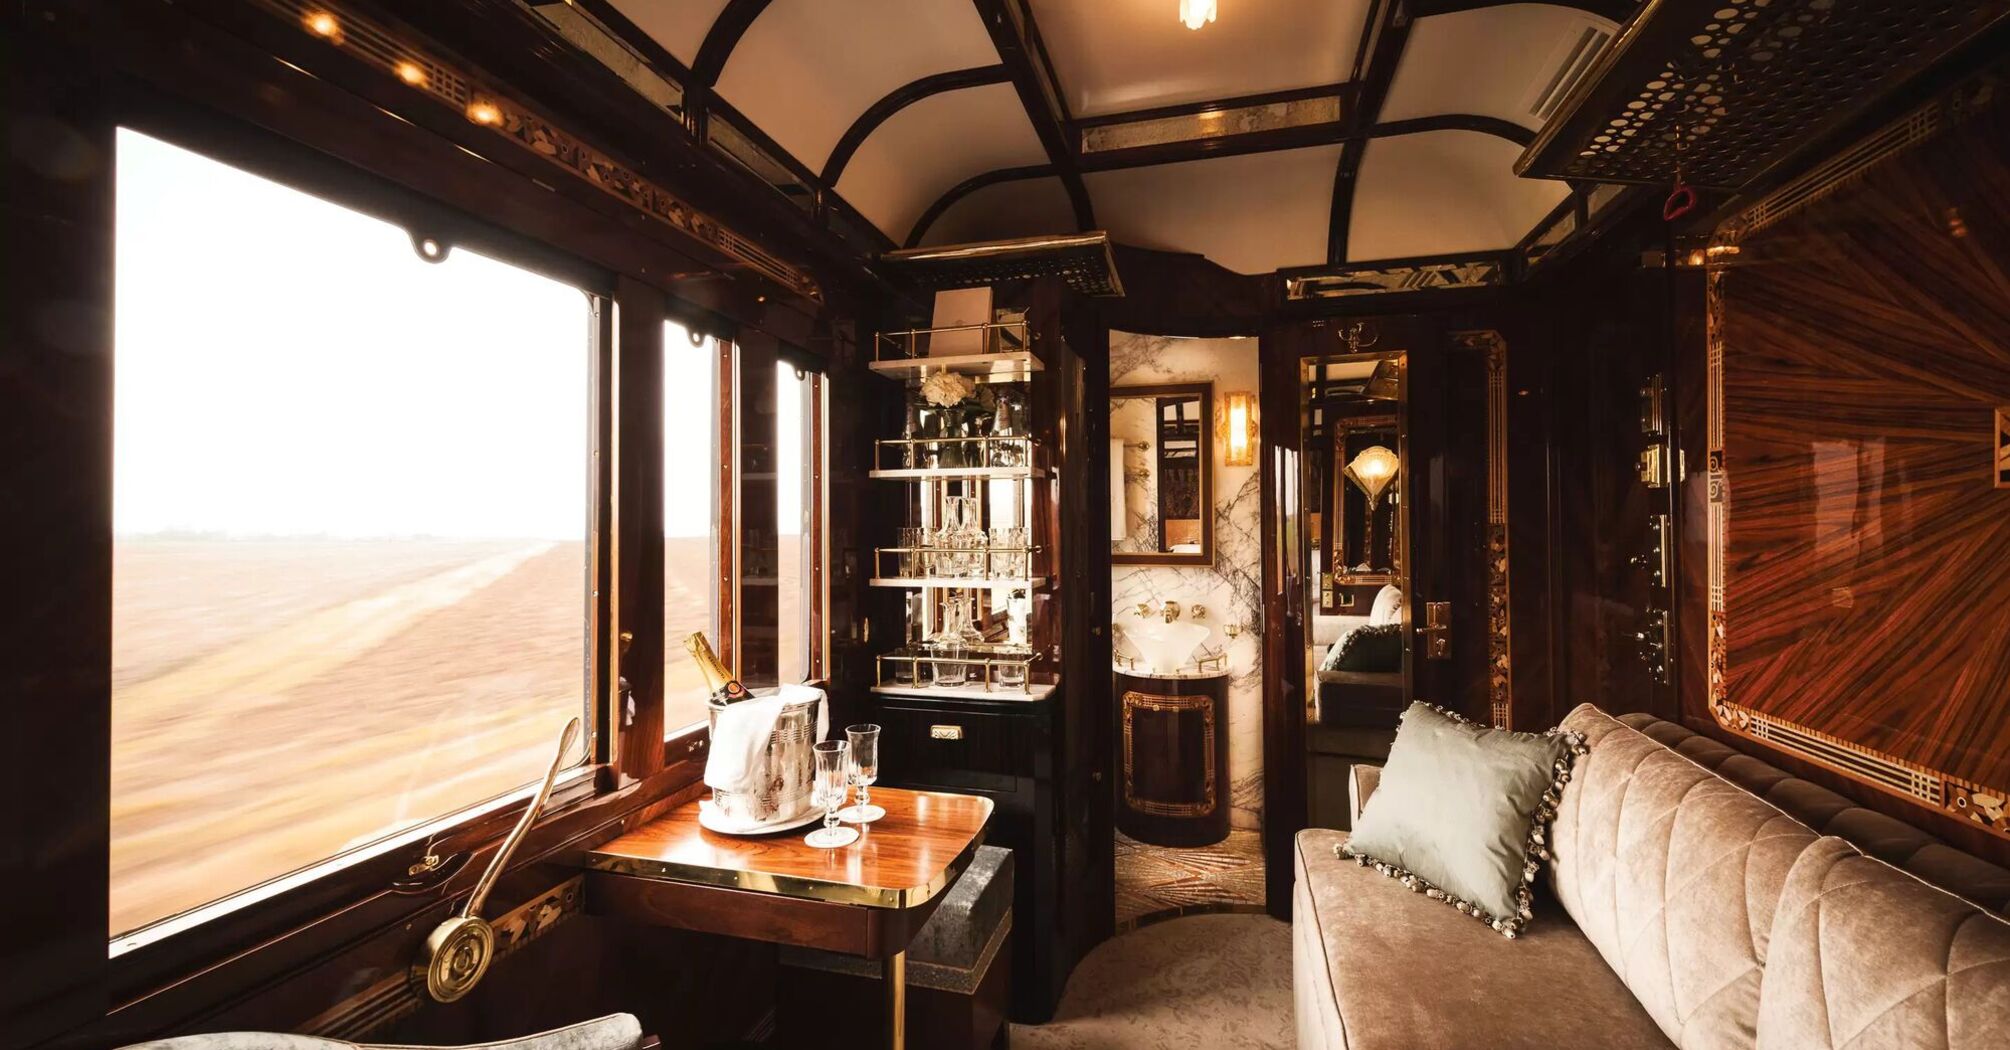 Luxurious train journeys: two tourist companies compete to revive the historic Eastern Express